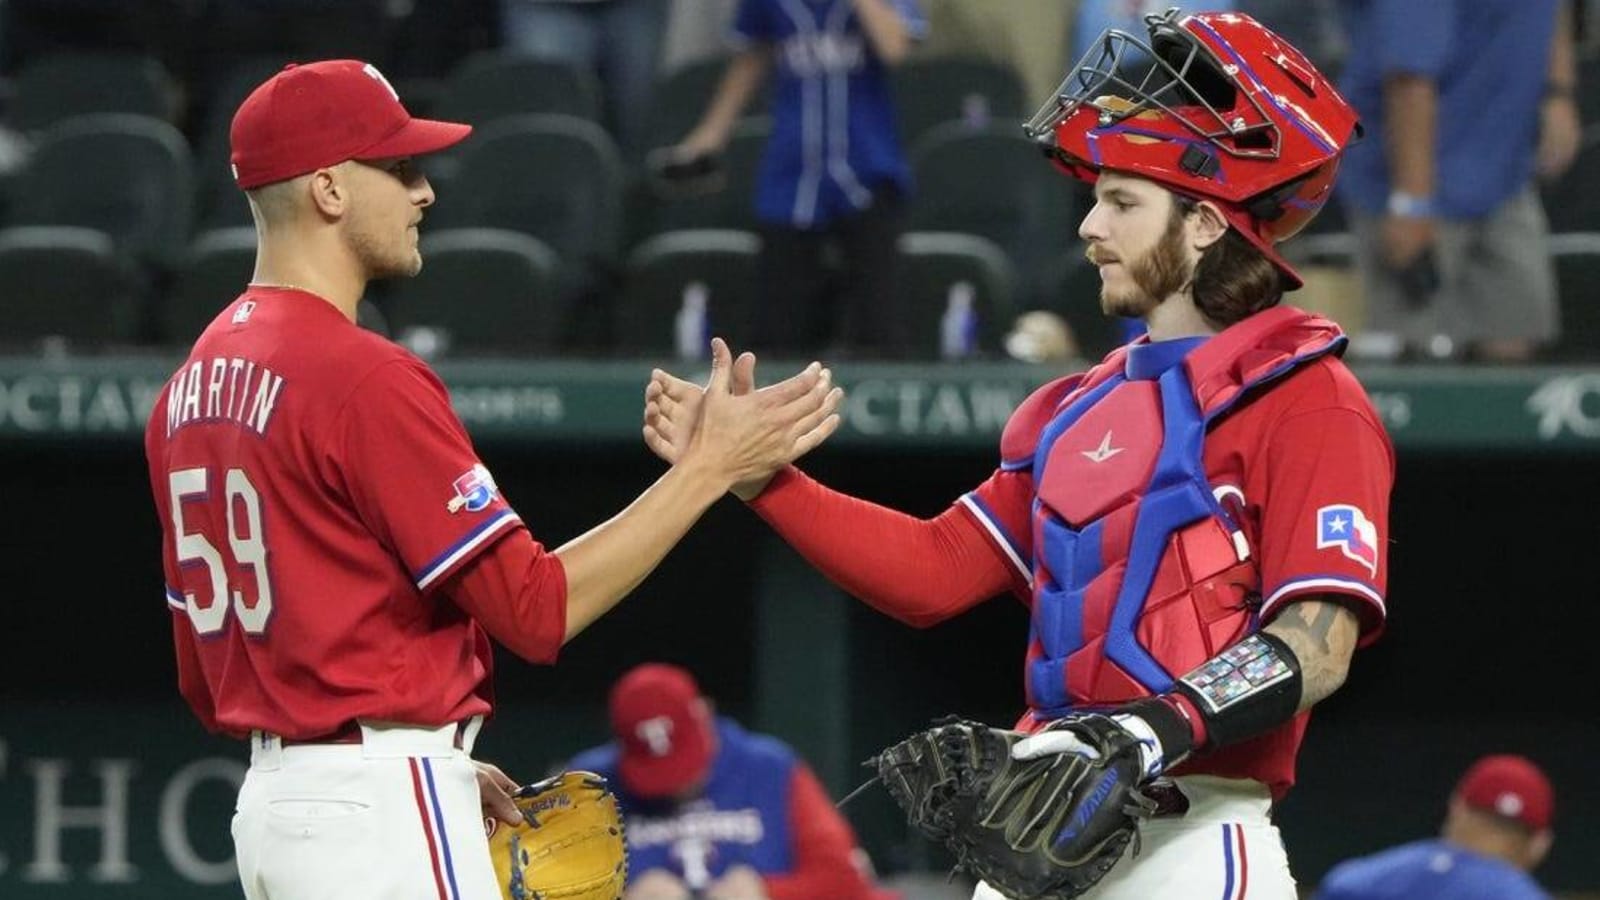 Rangers aim to close out series vs. Twins with a sweep